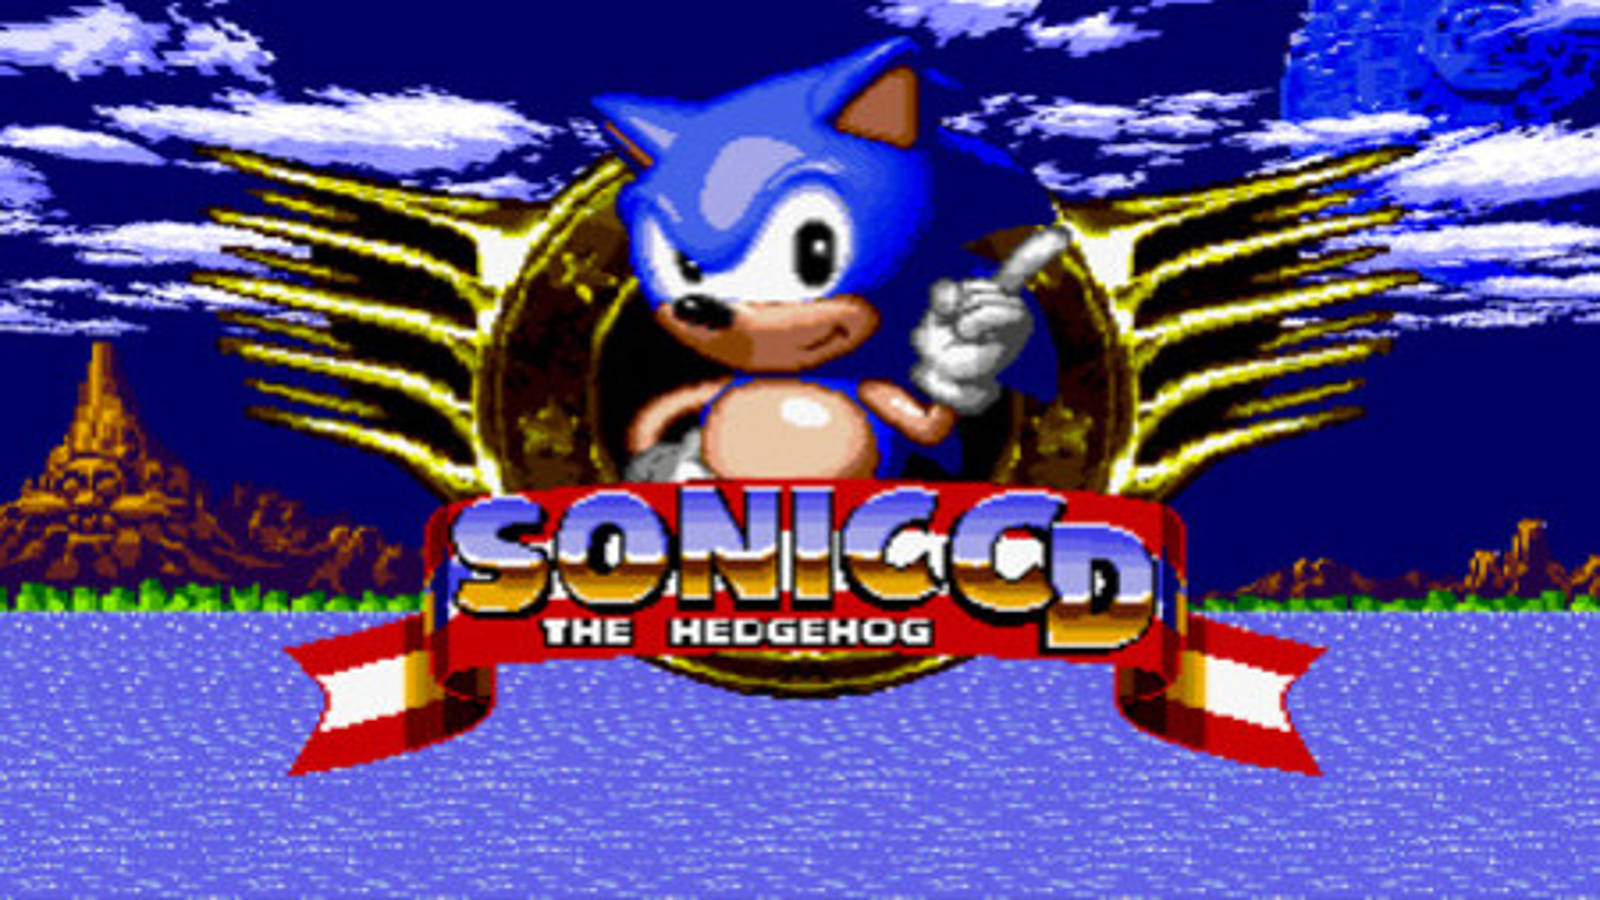 Sonic CD Classic - Apps on Google Play